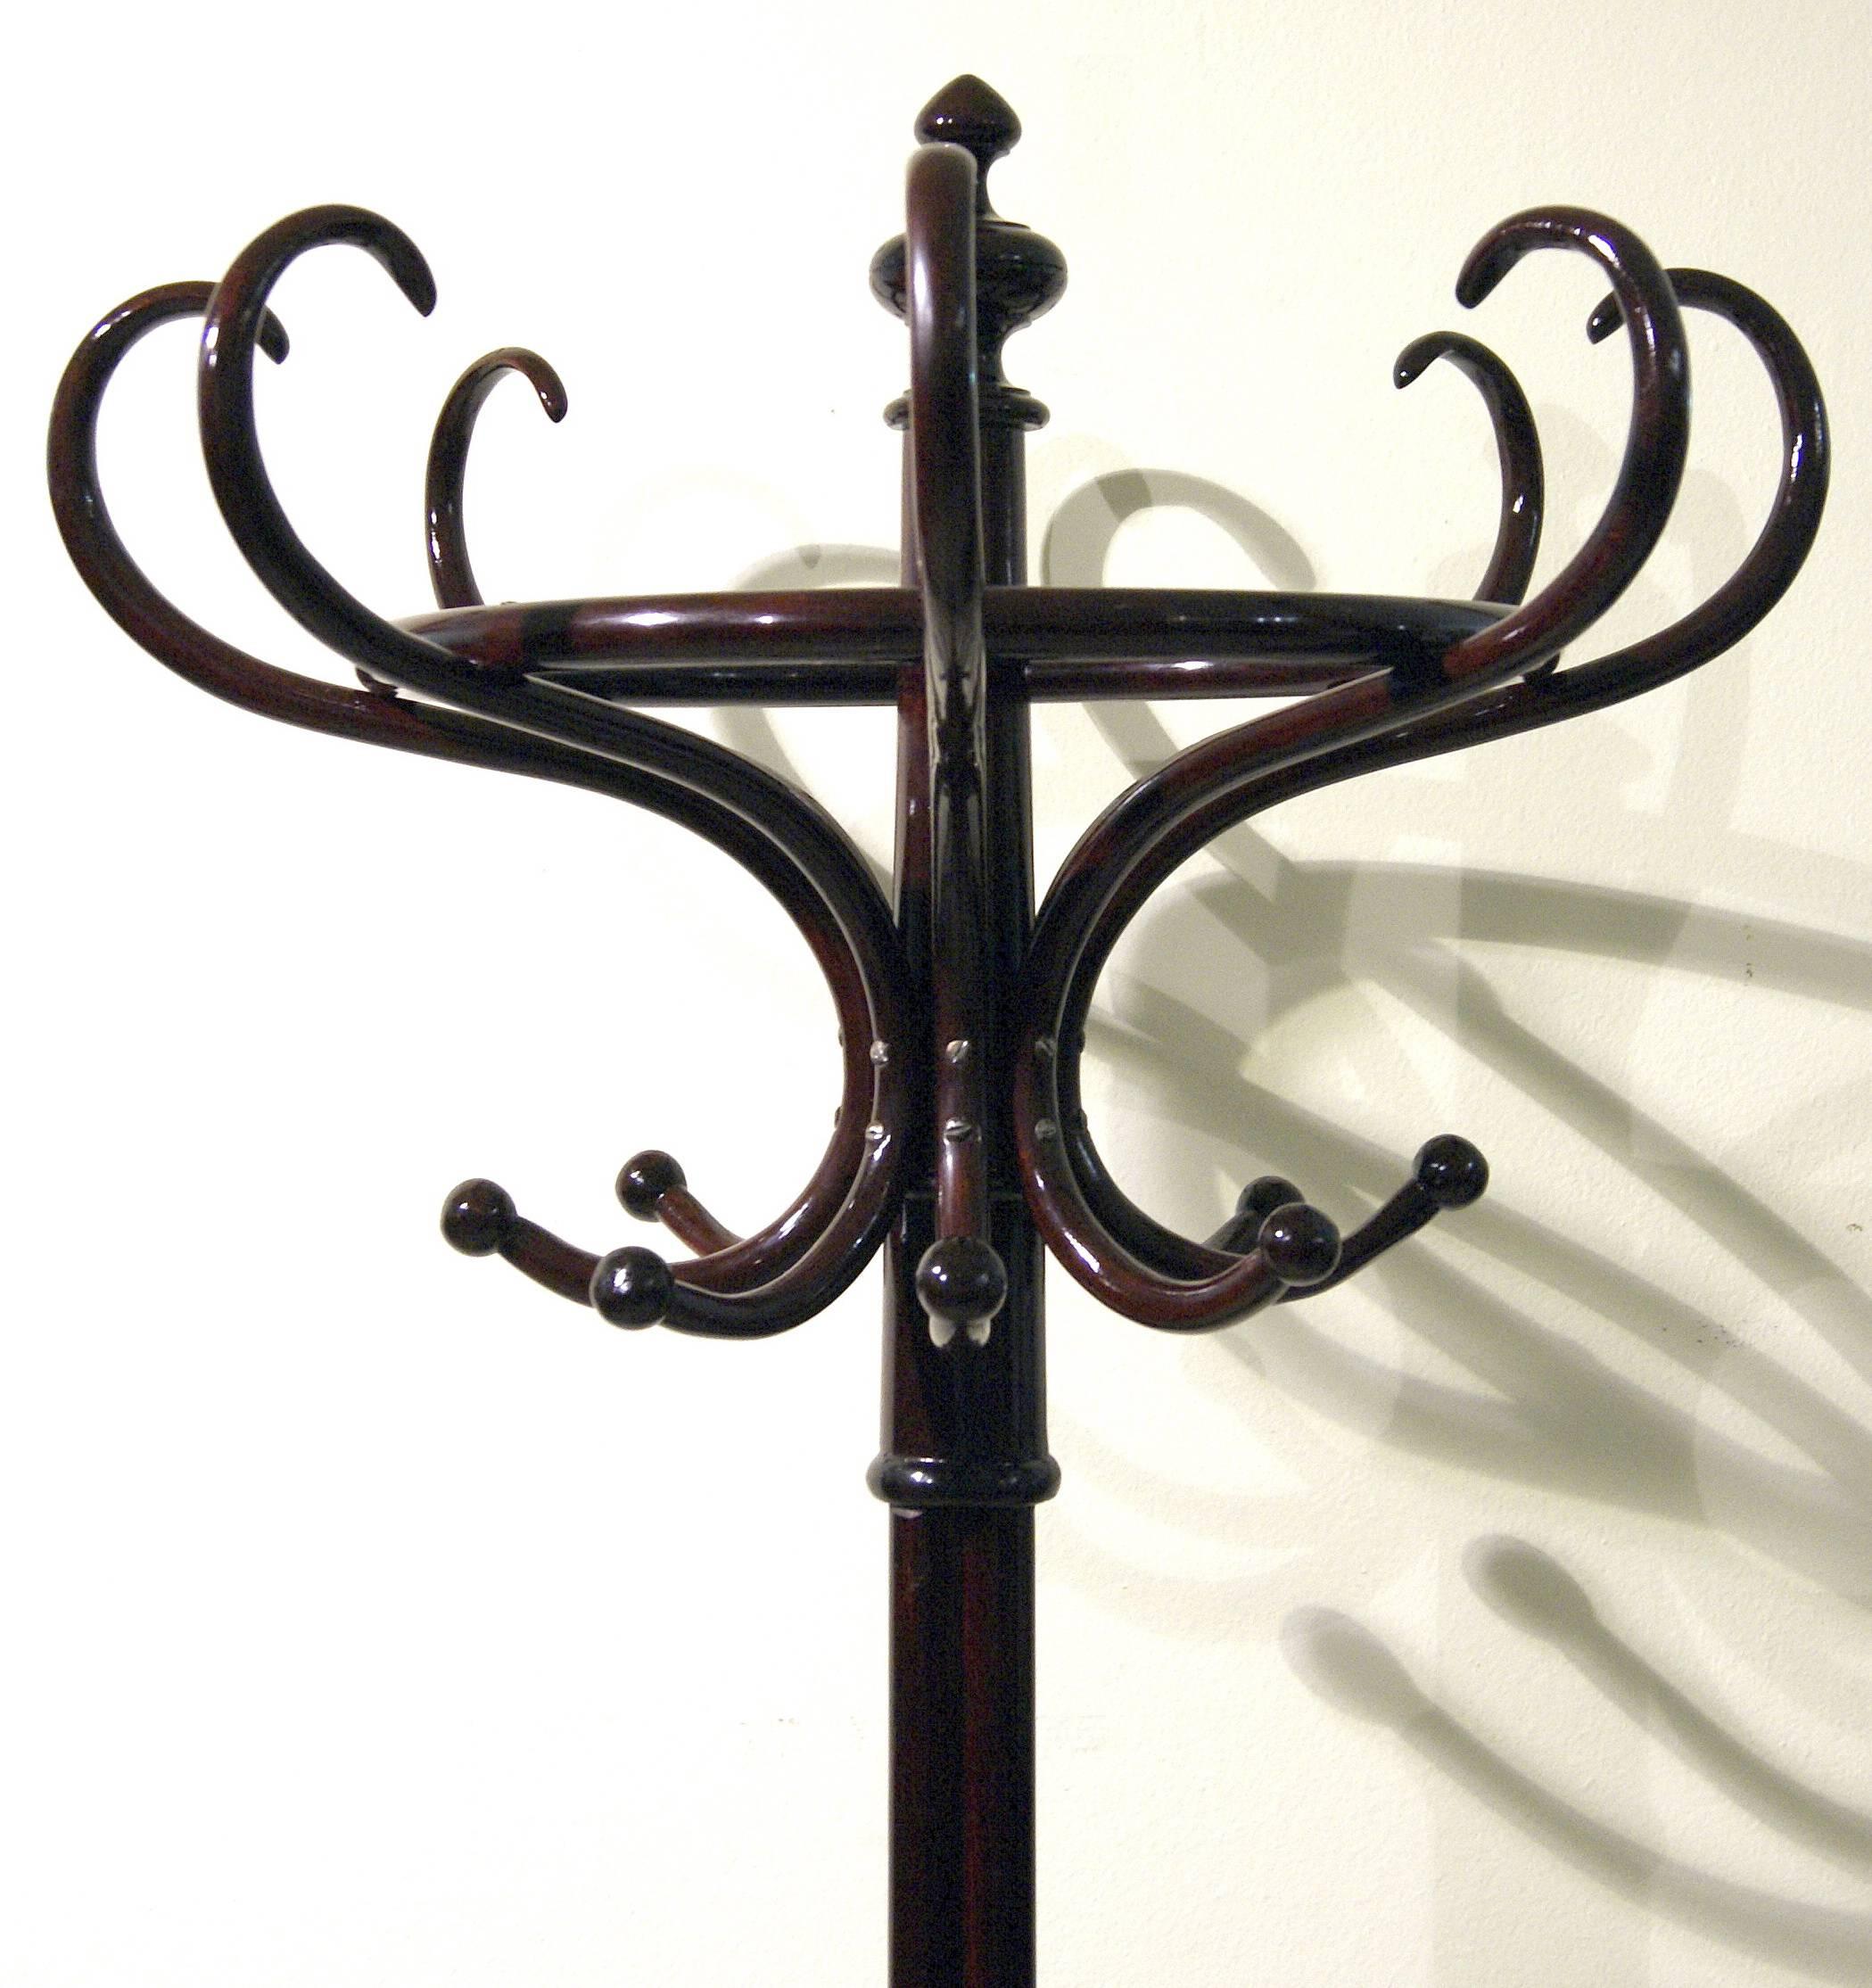 Thonet coat-tree / coat rack, model number 1 (authenticity guaranteed!)

Beechwood, dark mahogany stained / high quality handwork.
This Thonet coat-tree is of finest form type: It is accentuated by various 
circular as well as by helical